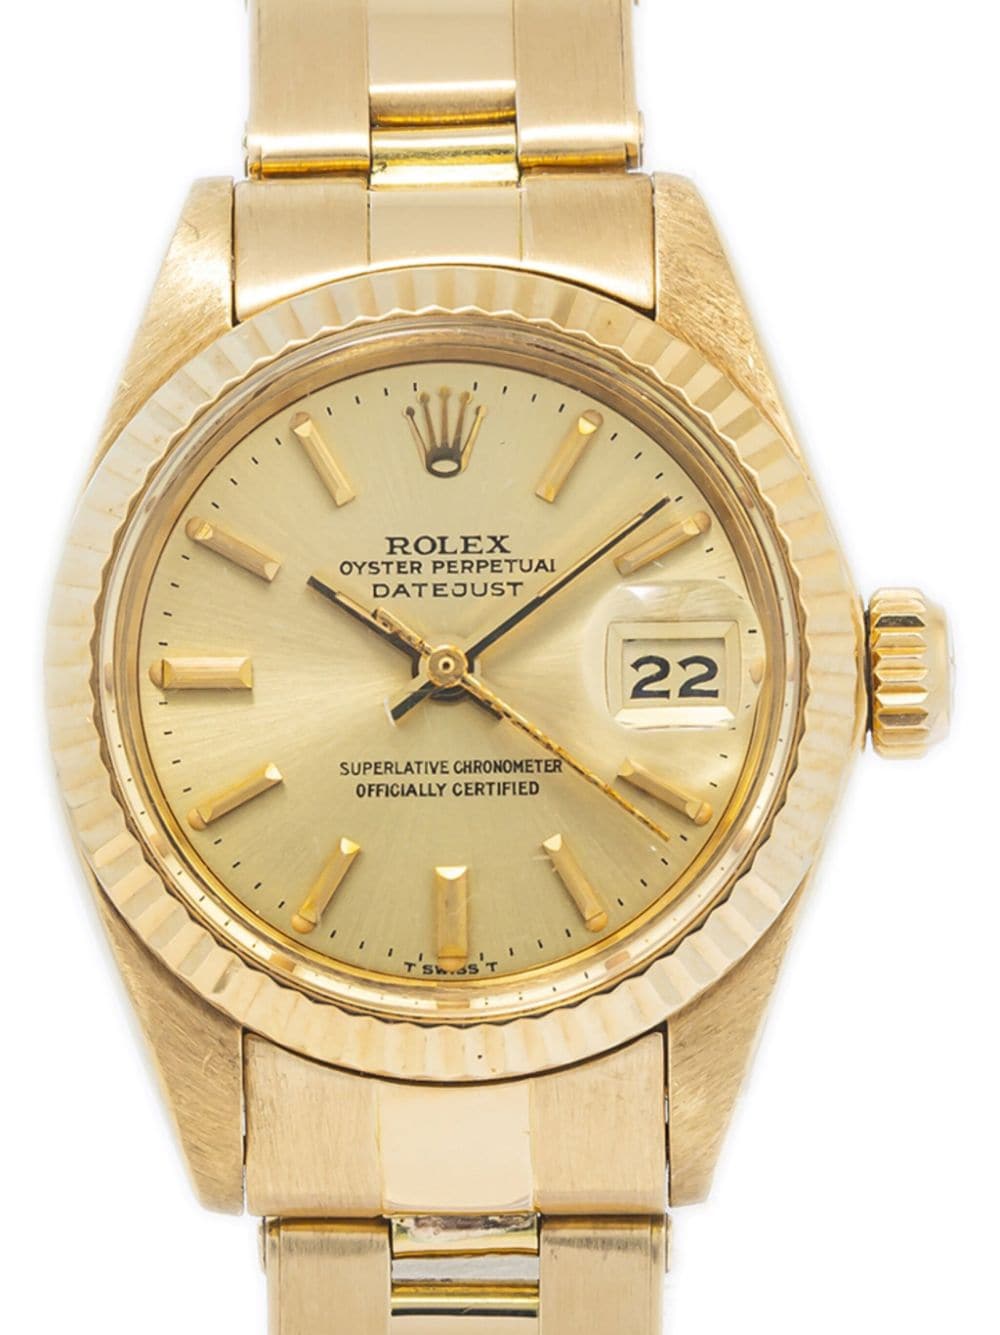 Pre-owned Rolex Datejust 26毫米腕表（典藏款） In Gold